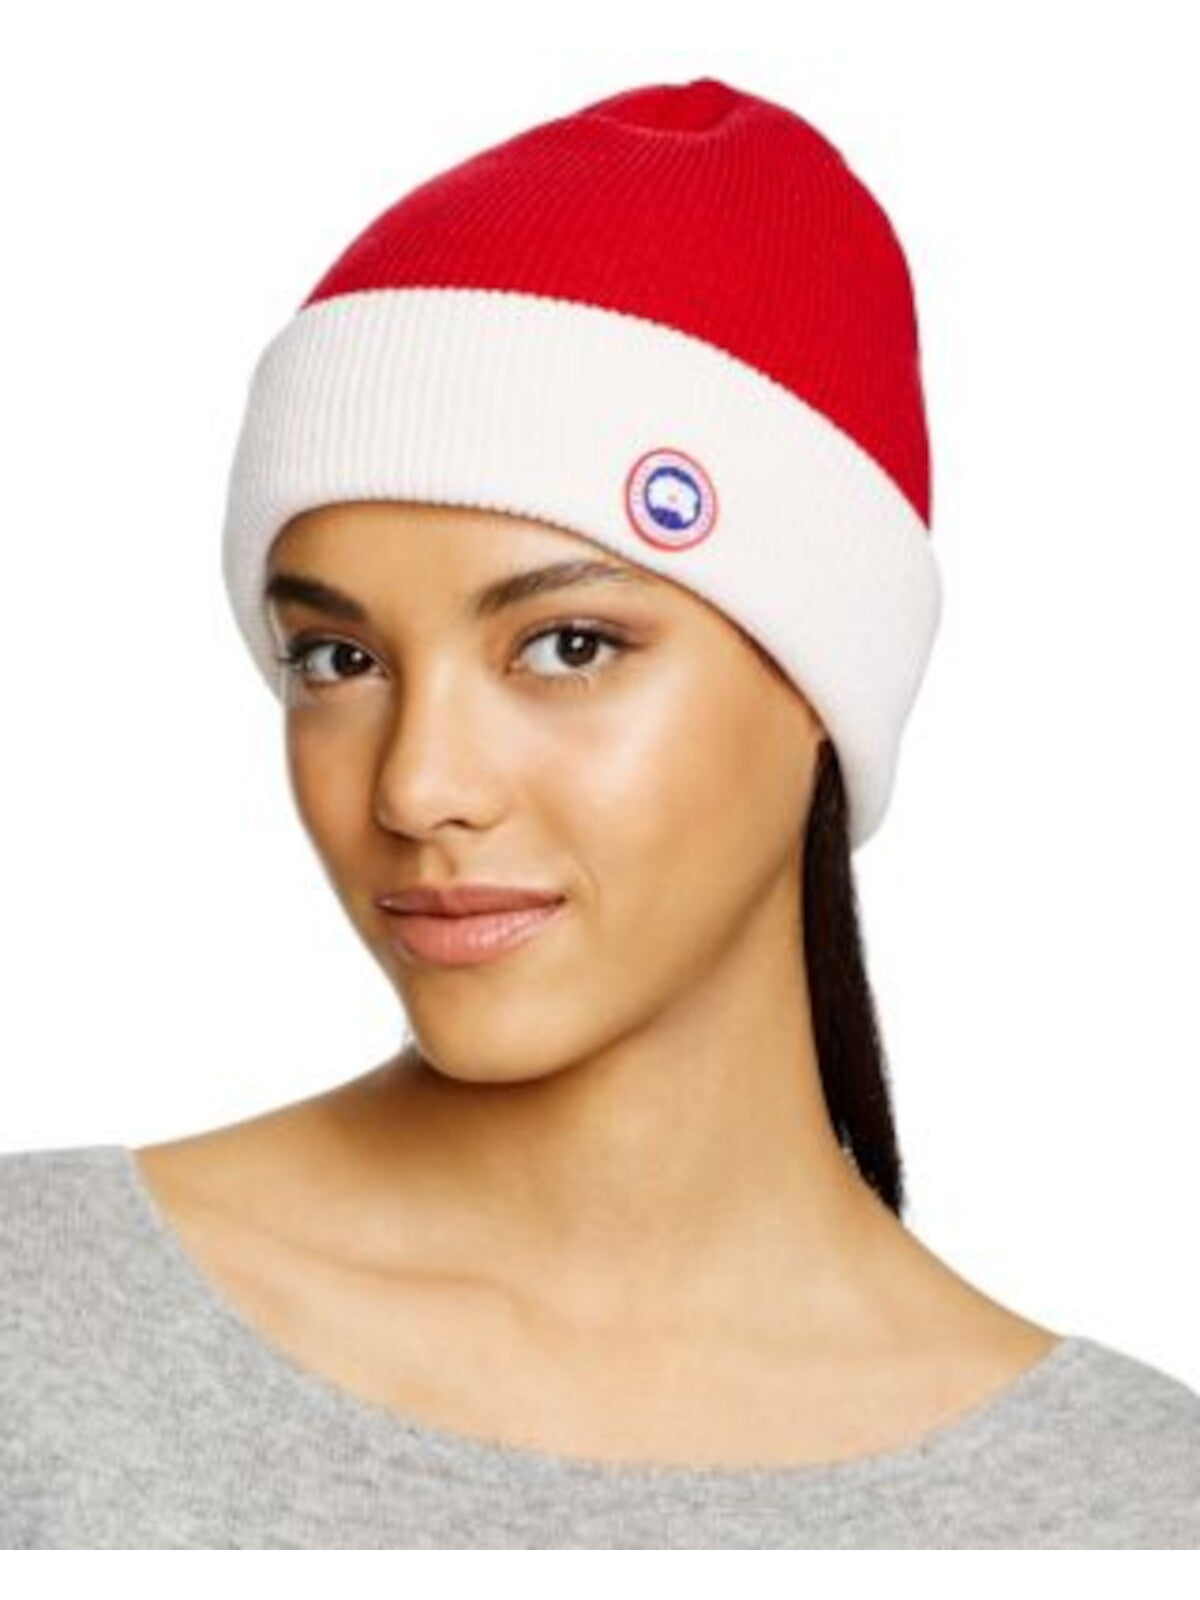 CANADA GOOSE Womens Red Color Block Wool Fitted Winter Beanie Hat Cap